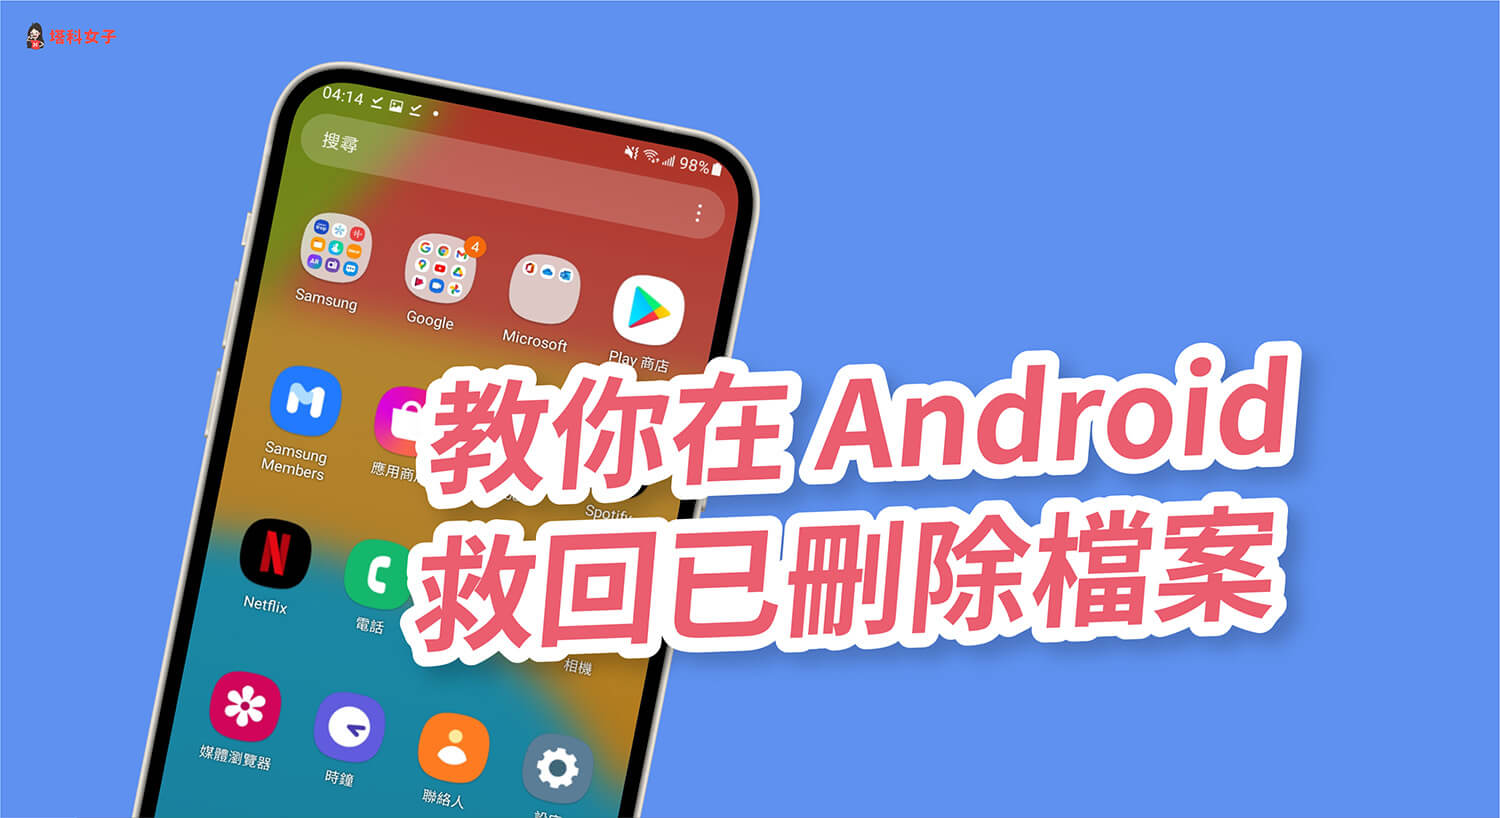 Android 如何救回手機刪除檔案？教你 3 招回復 Android 手機資料